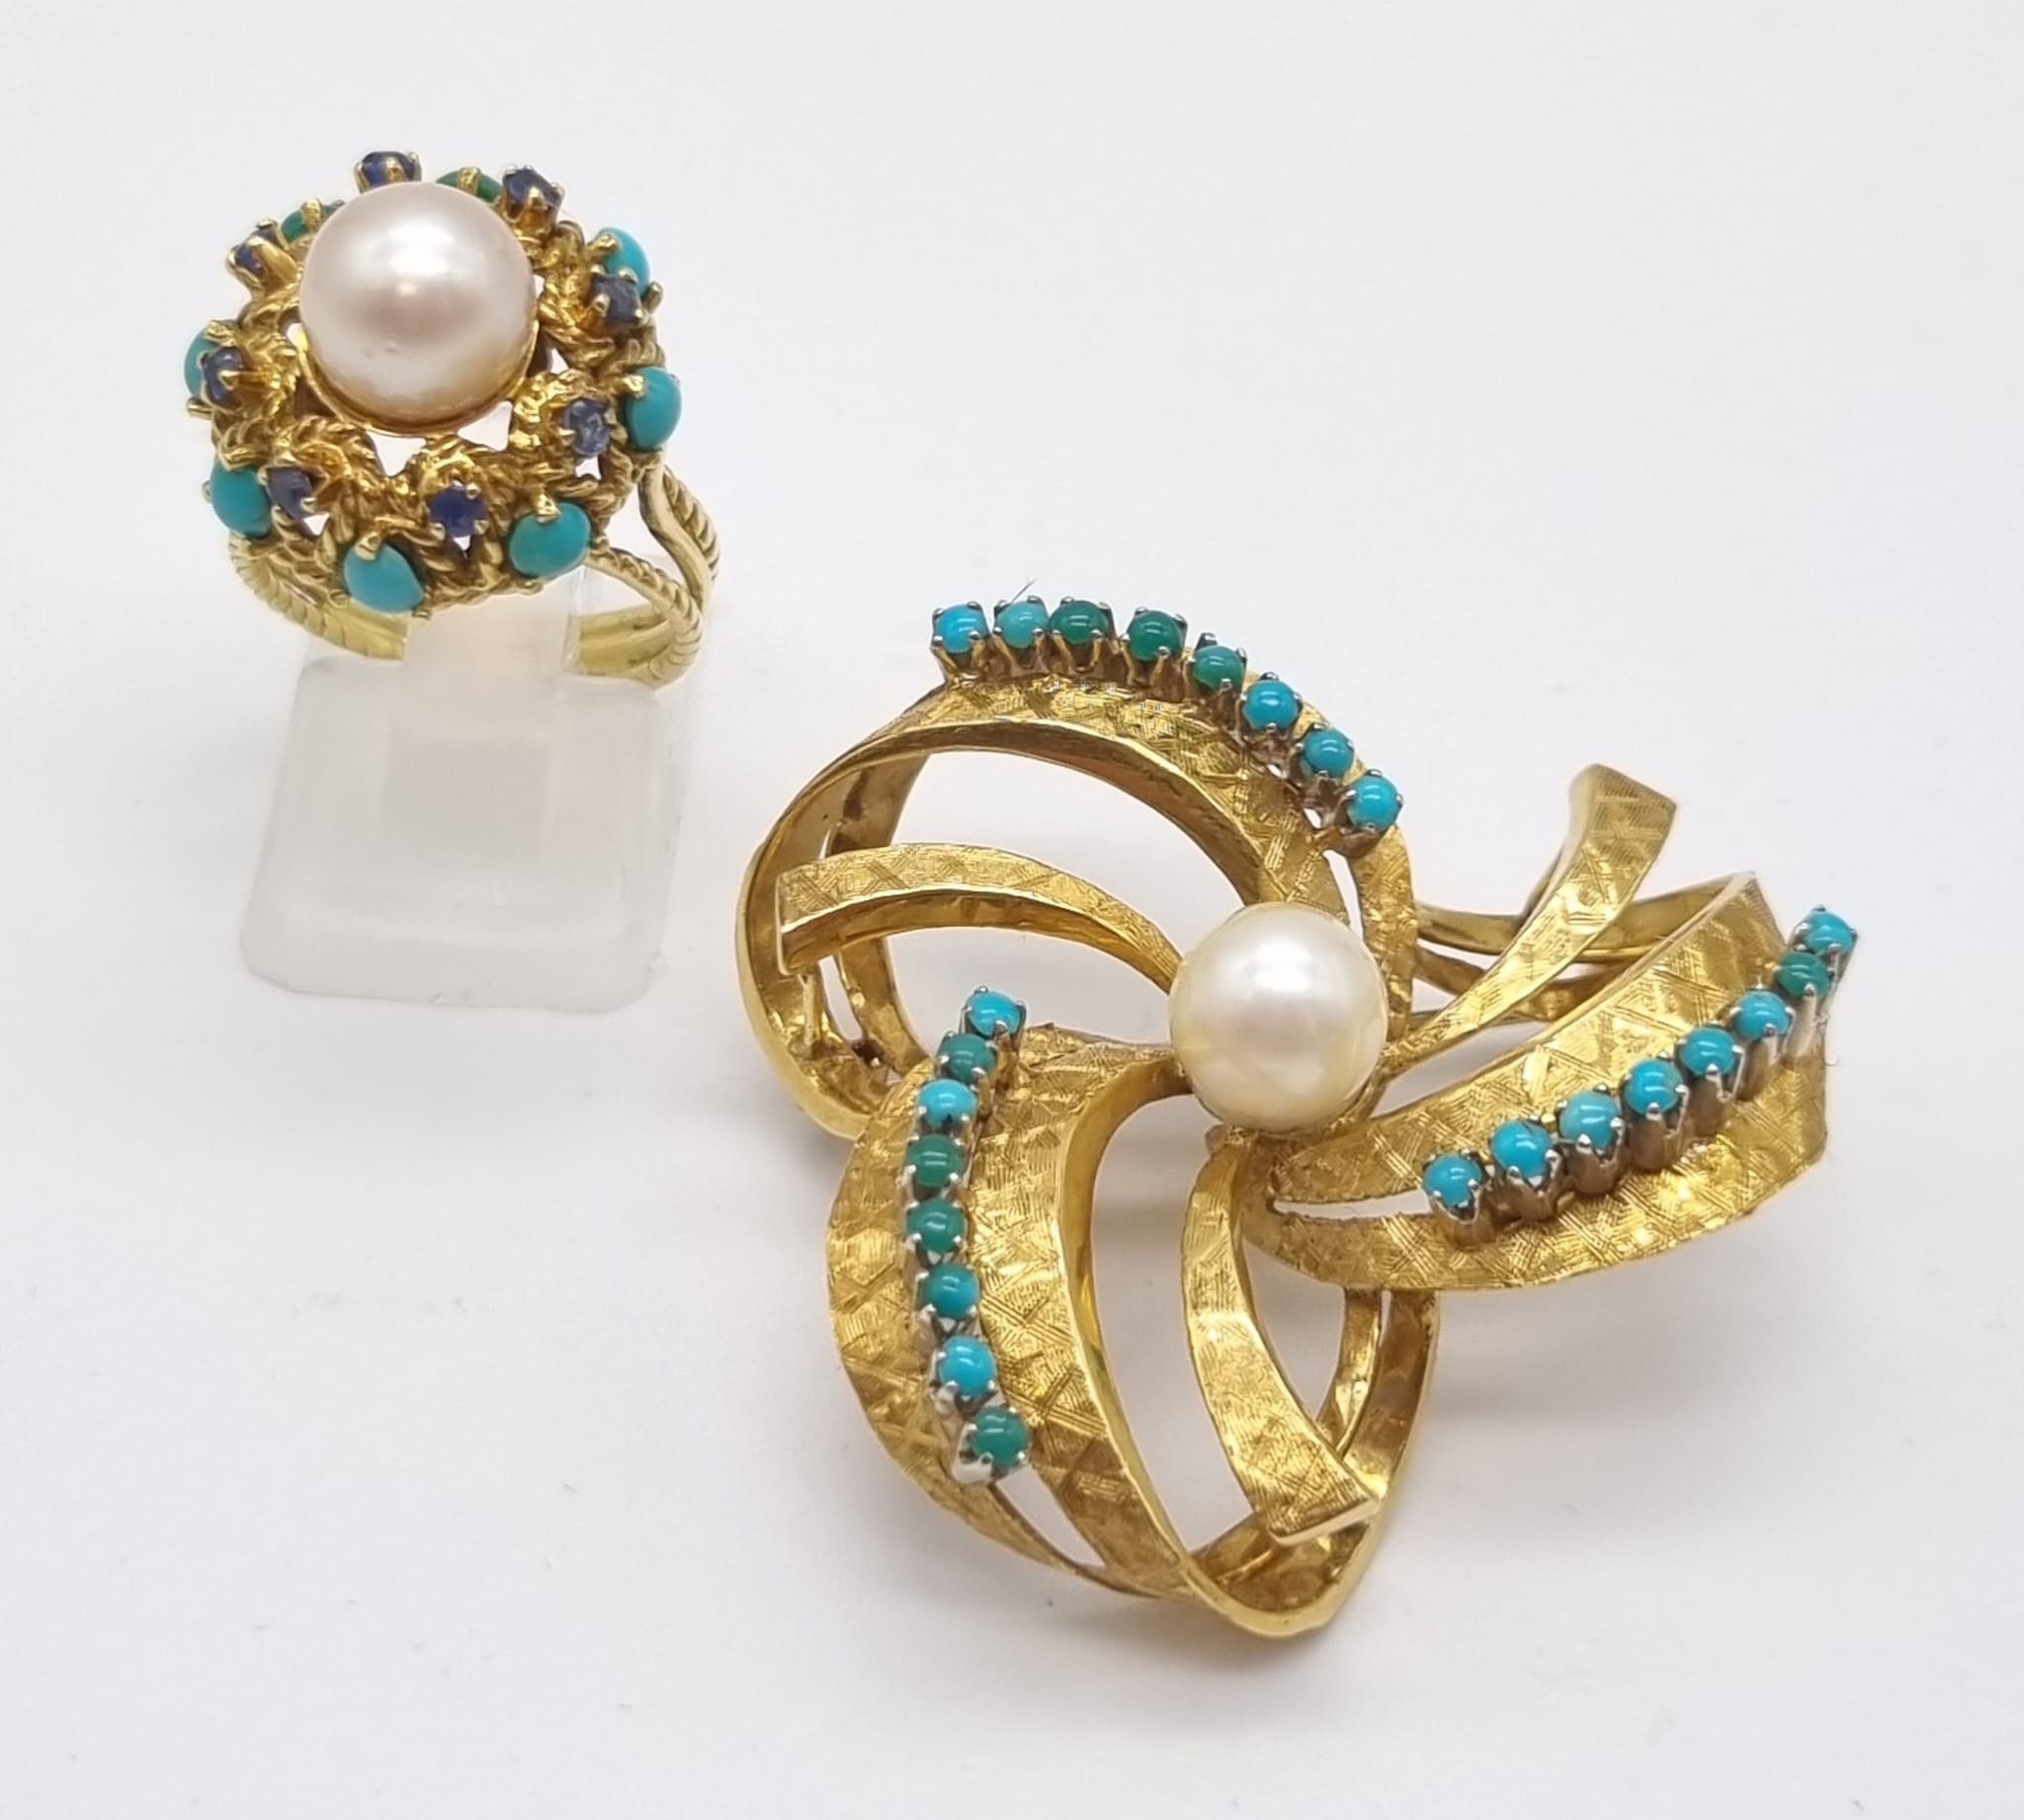 A Wonderful Vintage Possibly Antique 18K Yellow Gold, Turquoise and Pearl Ring/Brooch Set. Ring -